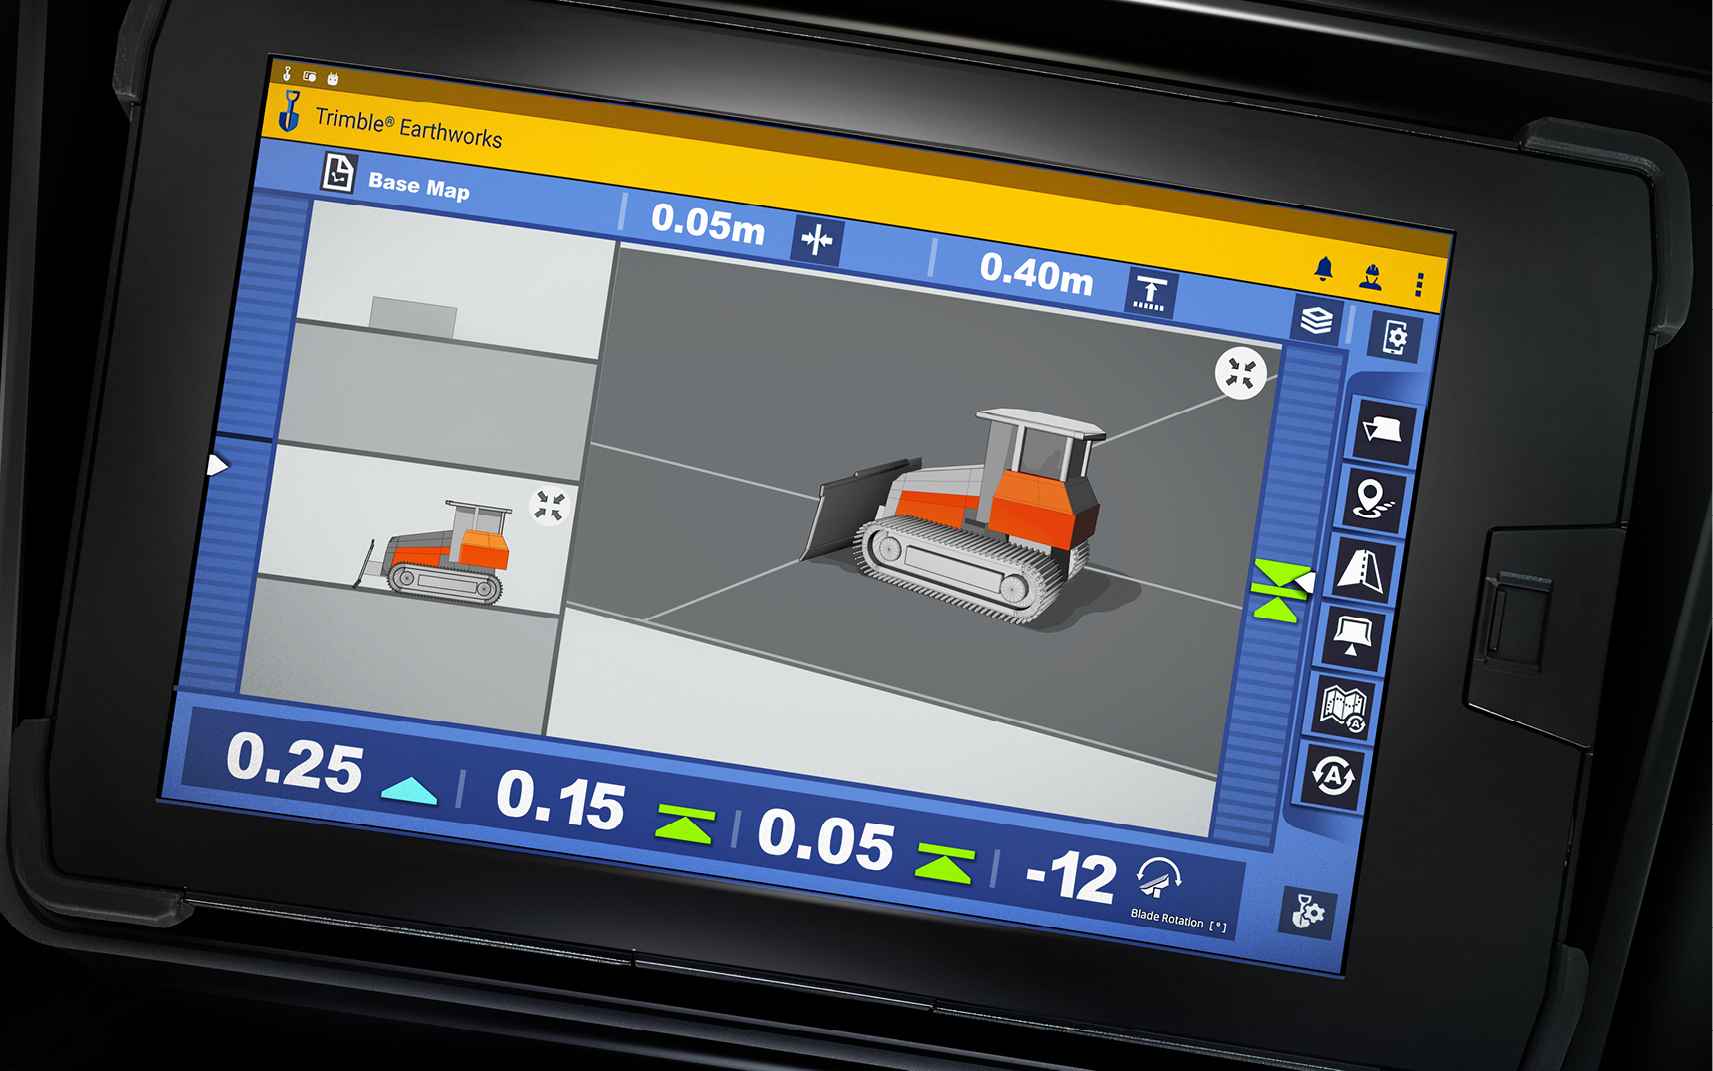 A GPS monitor in a DEVELON dozer displays the 3D machine control functionality.